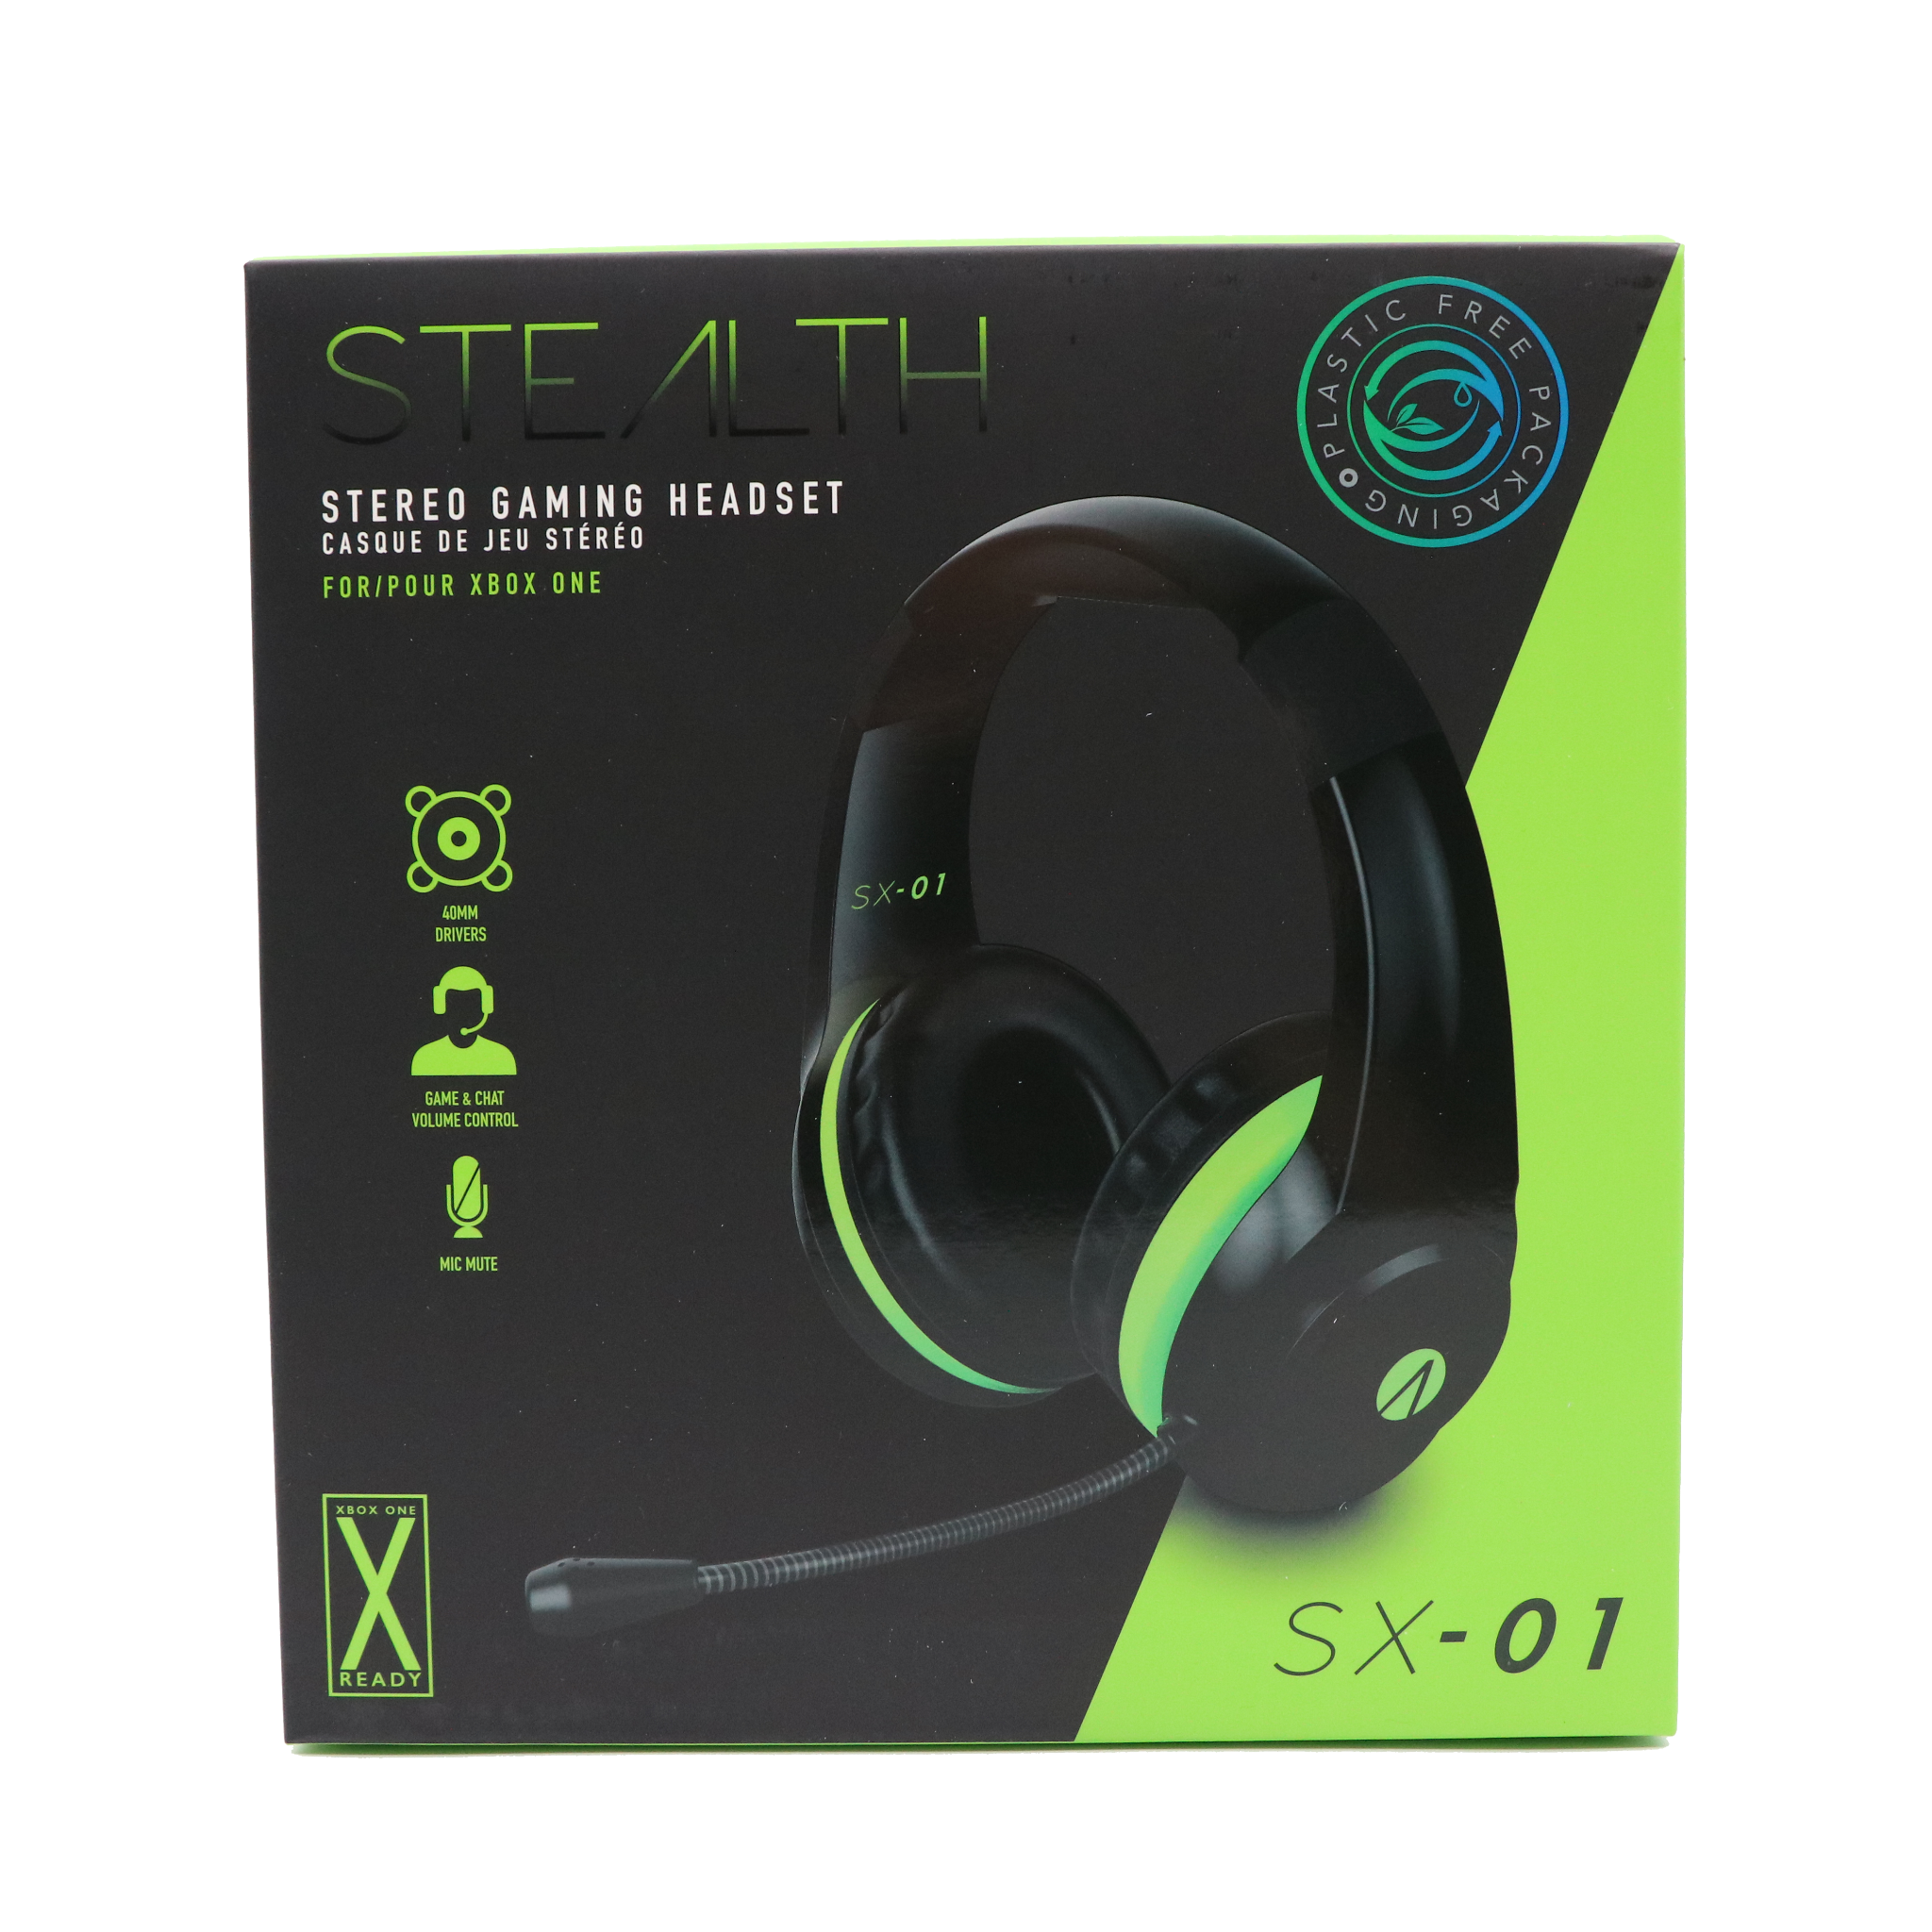 For Gaming Headset One/S/X InSpireVideoGames Xbox SX-01 Stealth Wired – P Microsoft Stereo